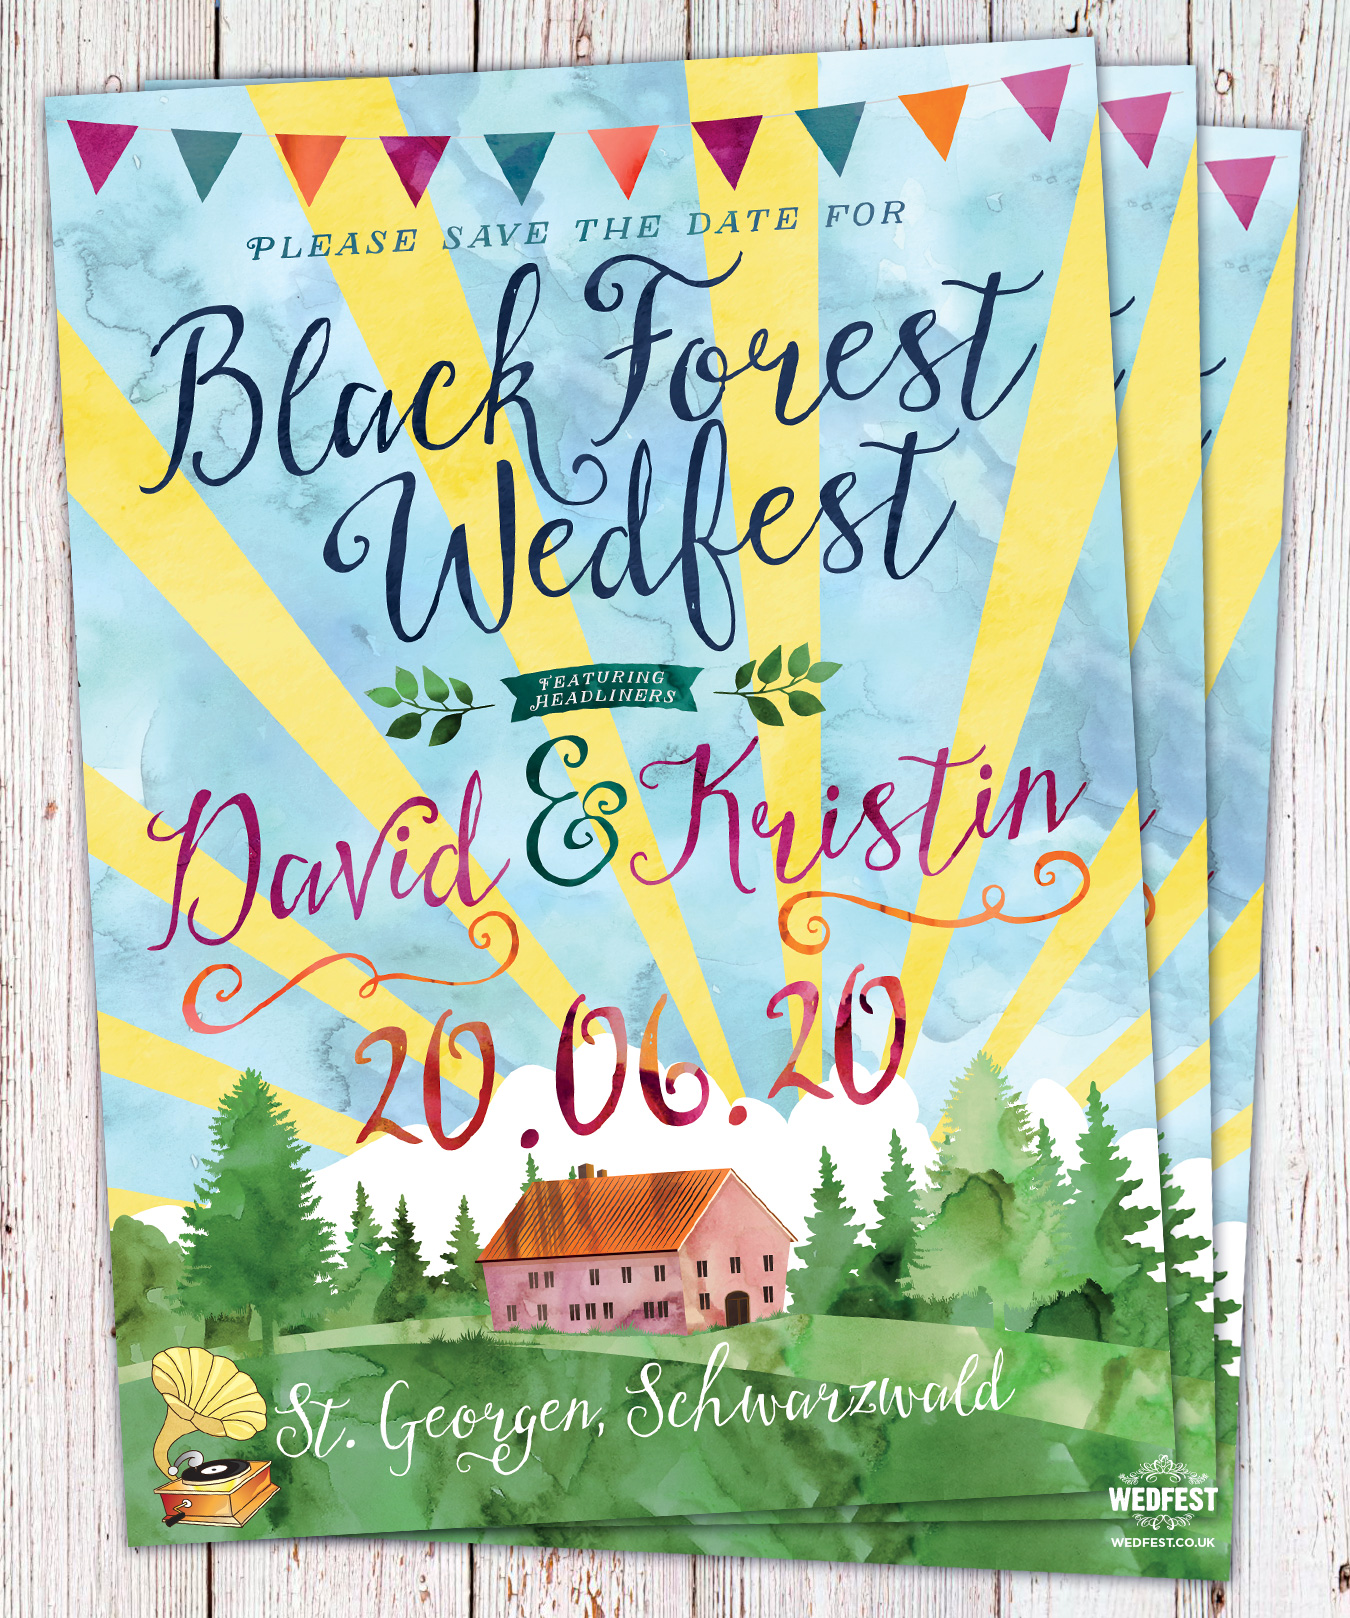 watercolour wedfest festival themed wedding save the date cards stationery